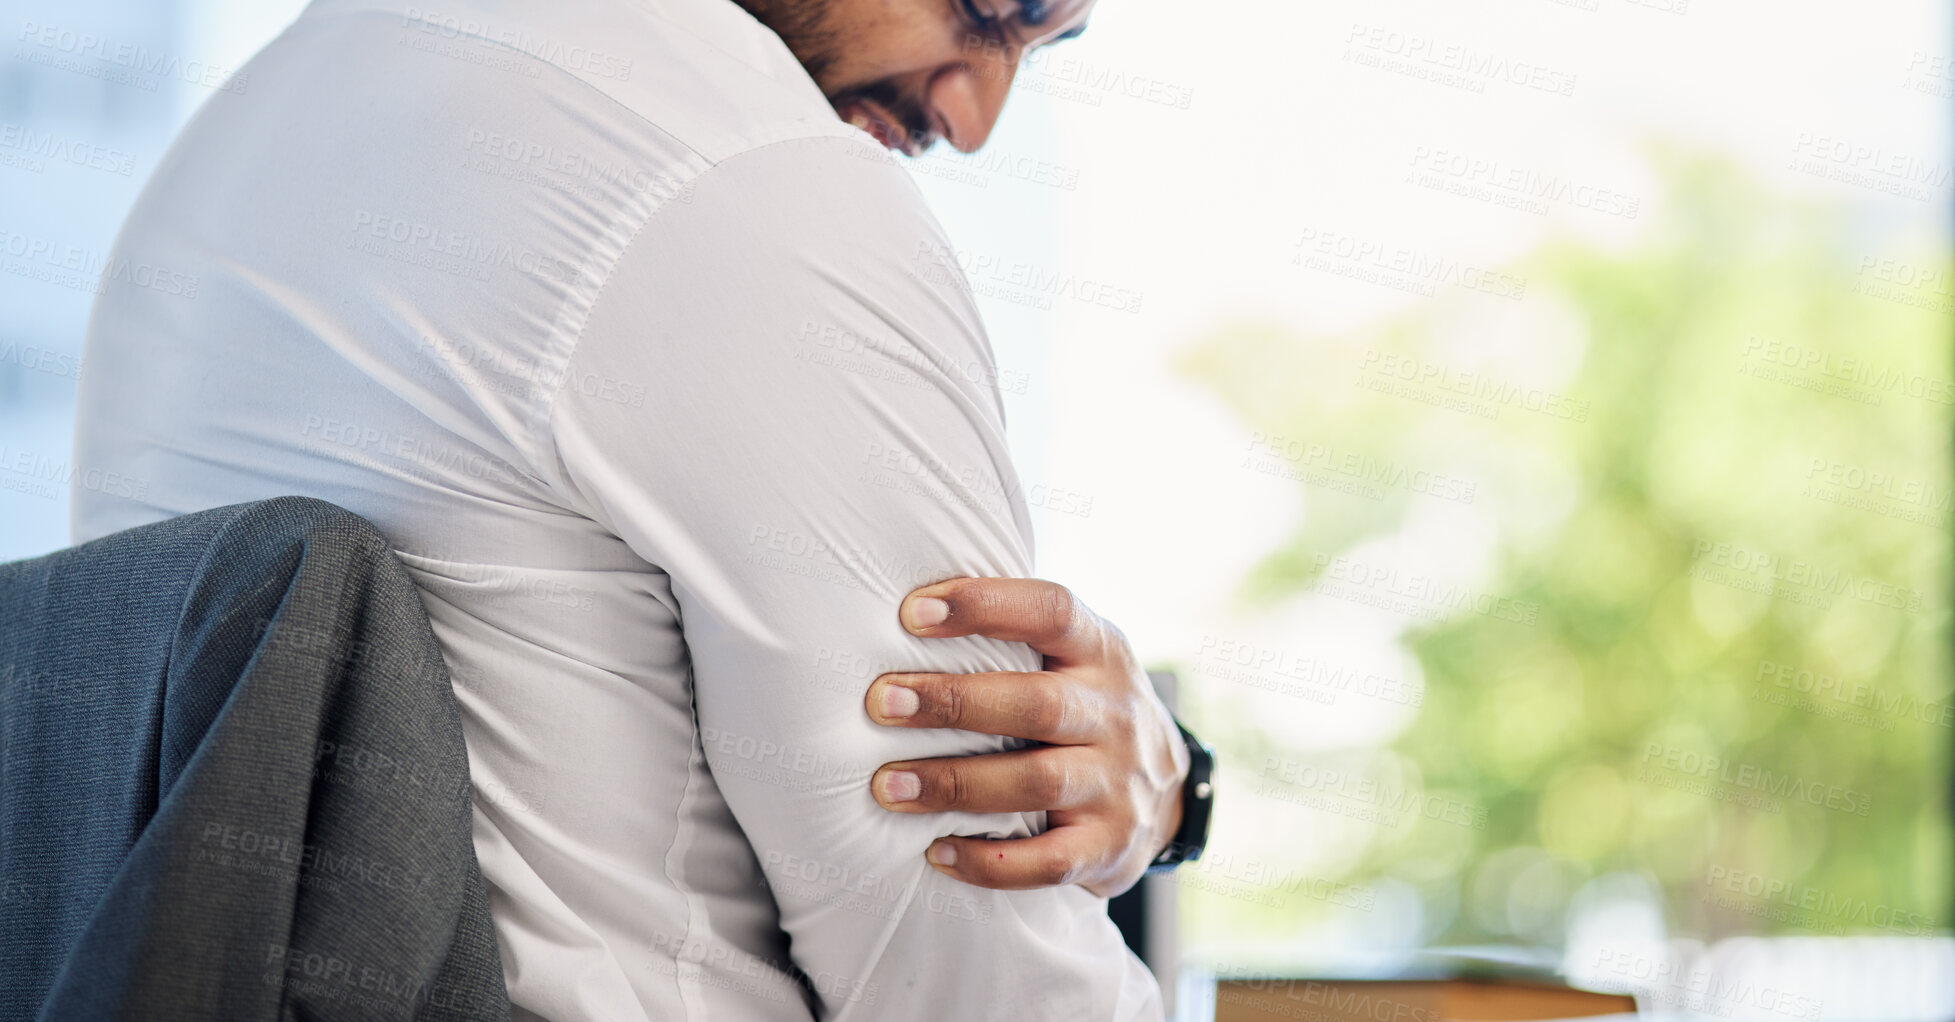 Buy stock photo Businessman, pain in arm or injury to muscle from accident, stress or strain in the office, workplace or medical emergency at work. Man, sore arms or strain on muscles from working or activity